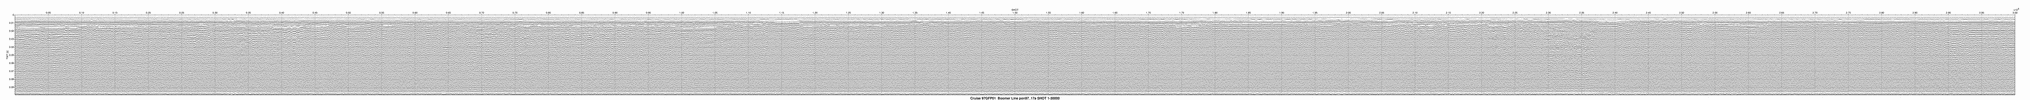 pon97_17a seismic profile thumbnail with link to full-size image